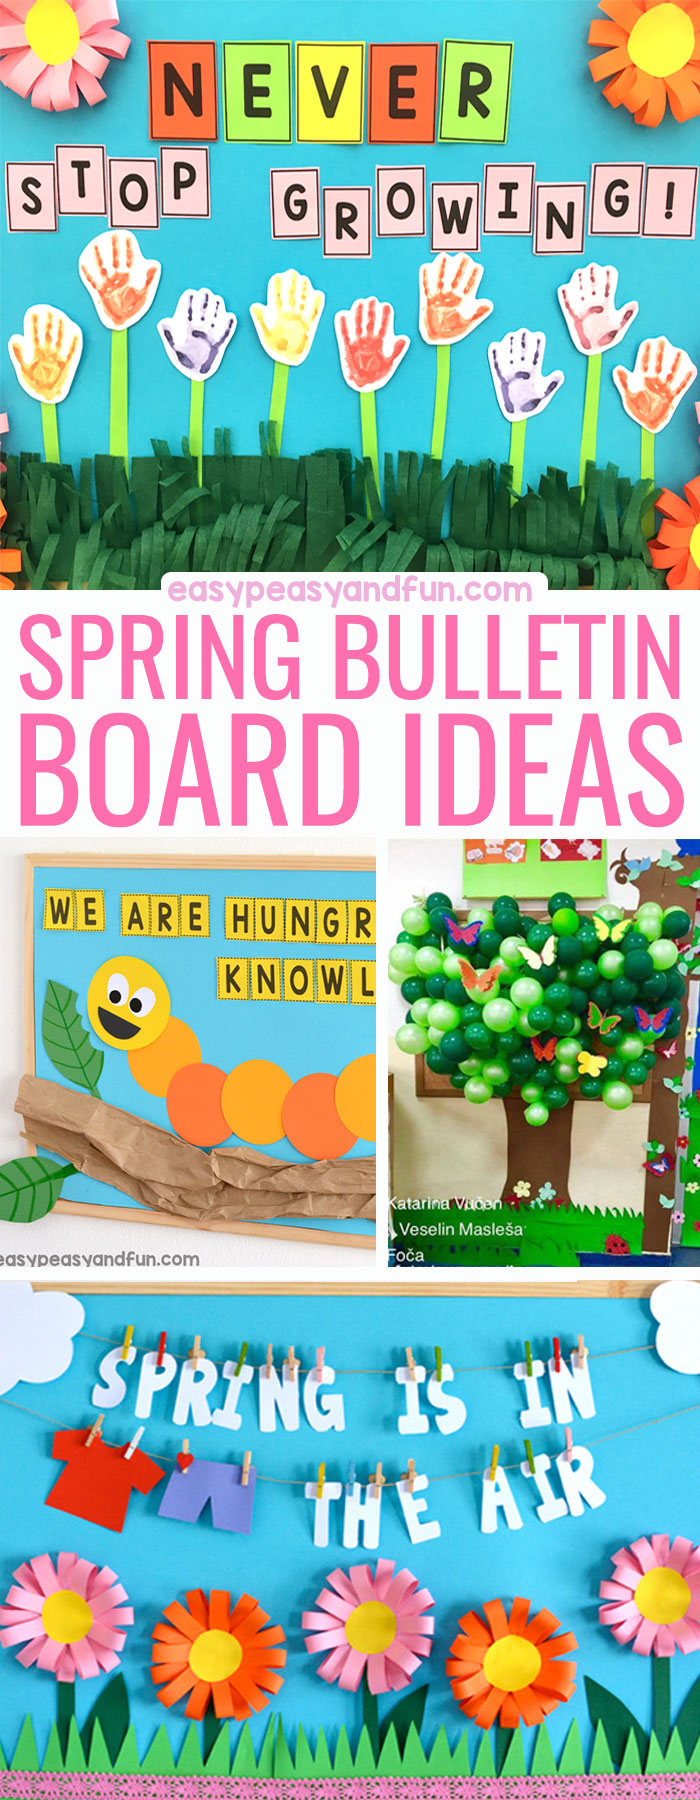 42 Awesome Interactive Bulletin Board Ideas for Your Classroom